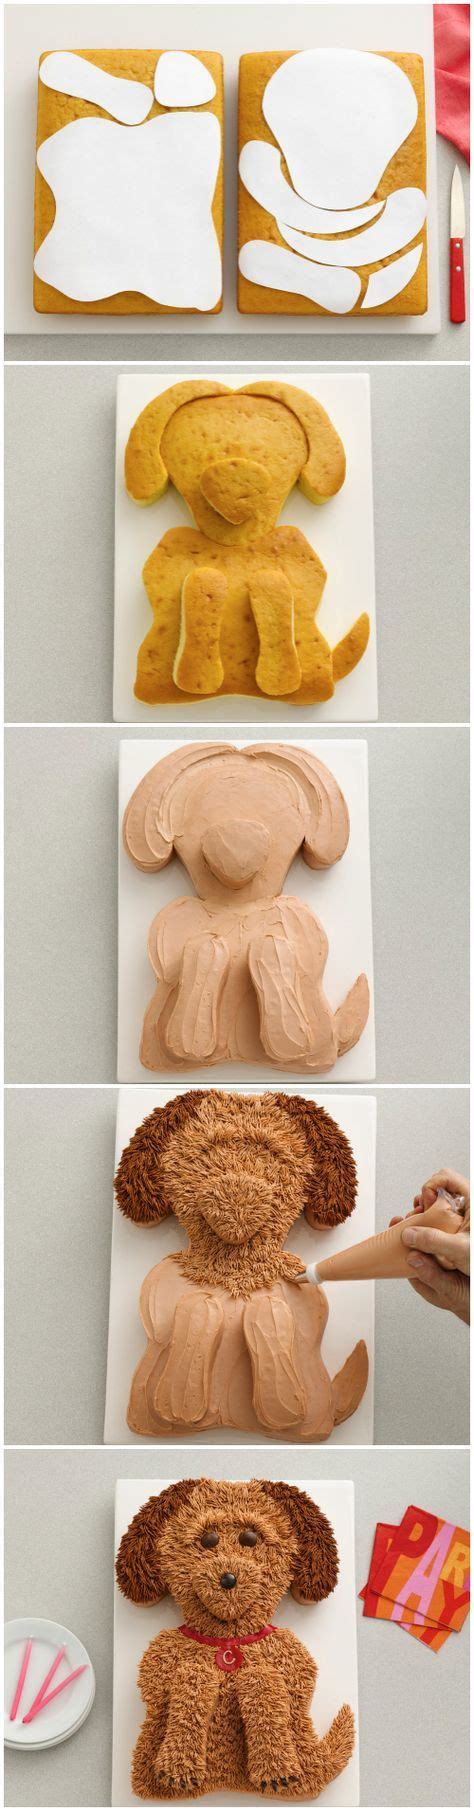 Can people please post pictures of poodles that have the teddy bear look? Cute Golden Doodle Dog Cake | Recipe | Puppy cake, Dog ...